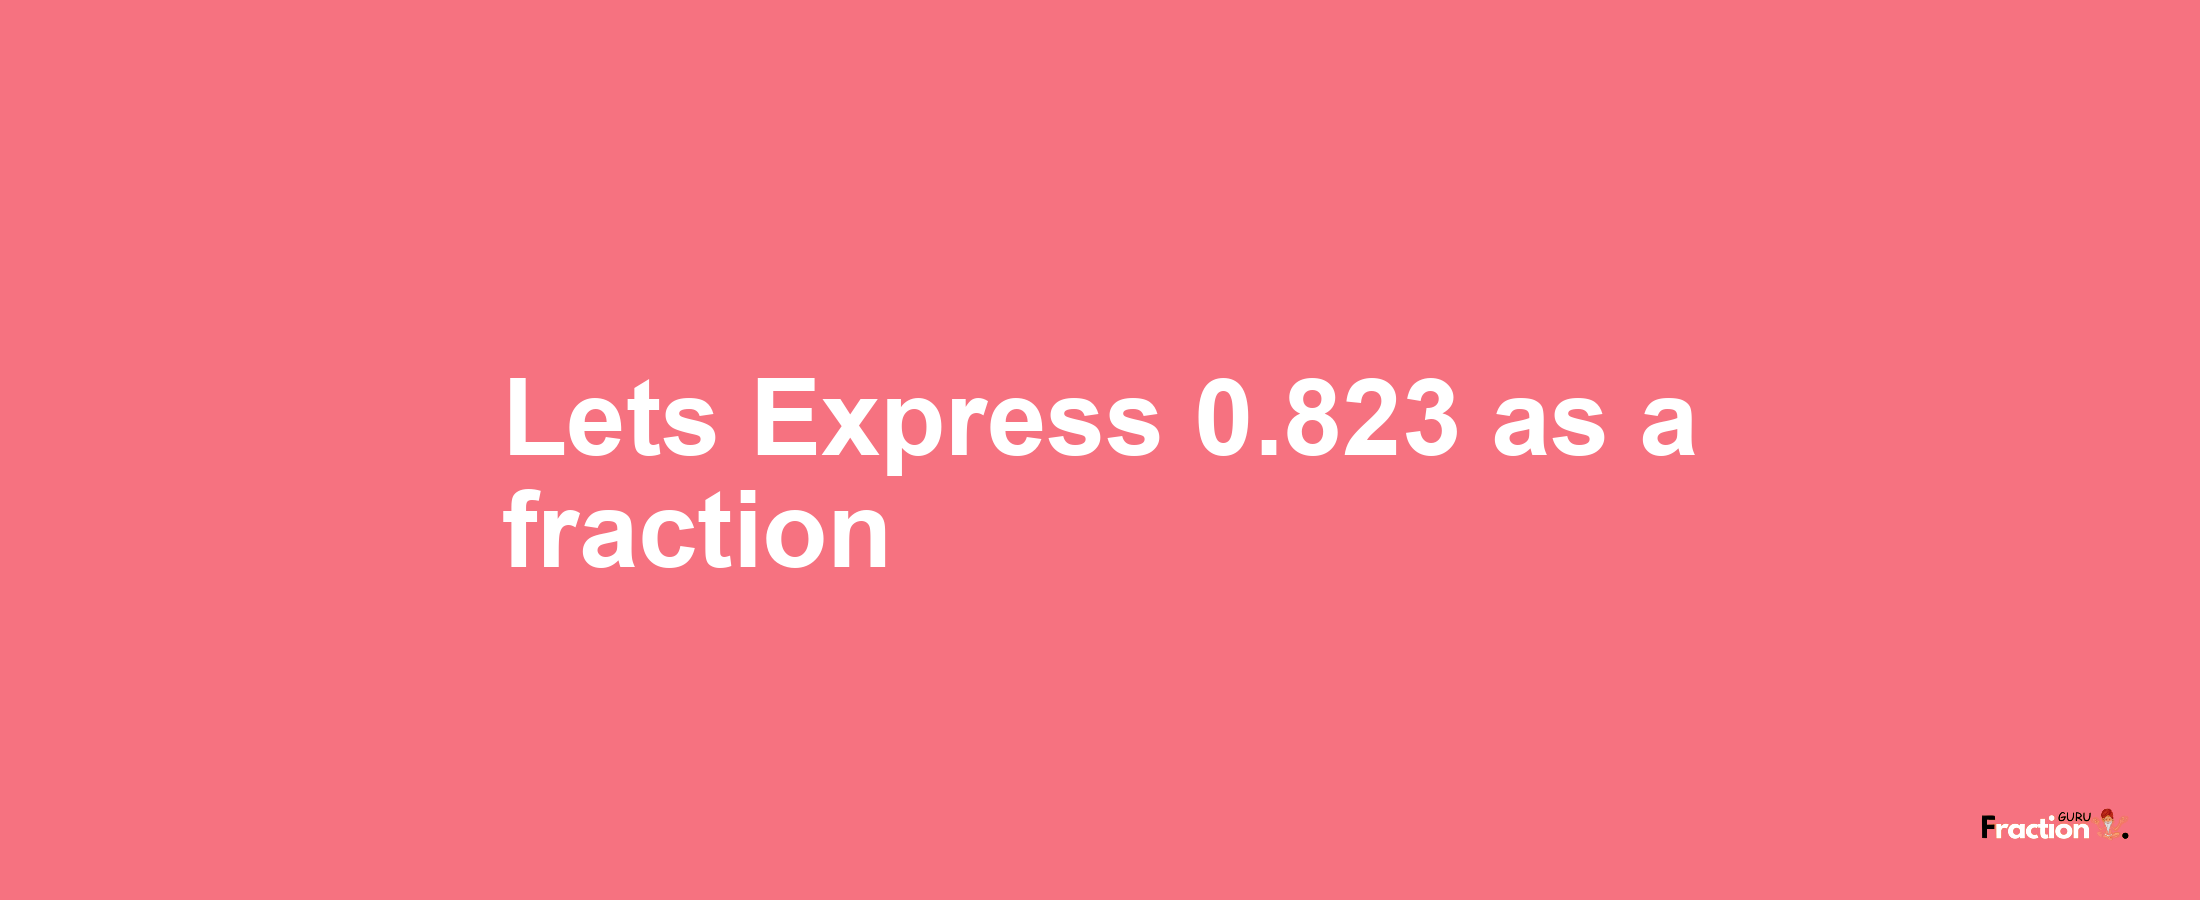 Lets Express 0.823 as afraction